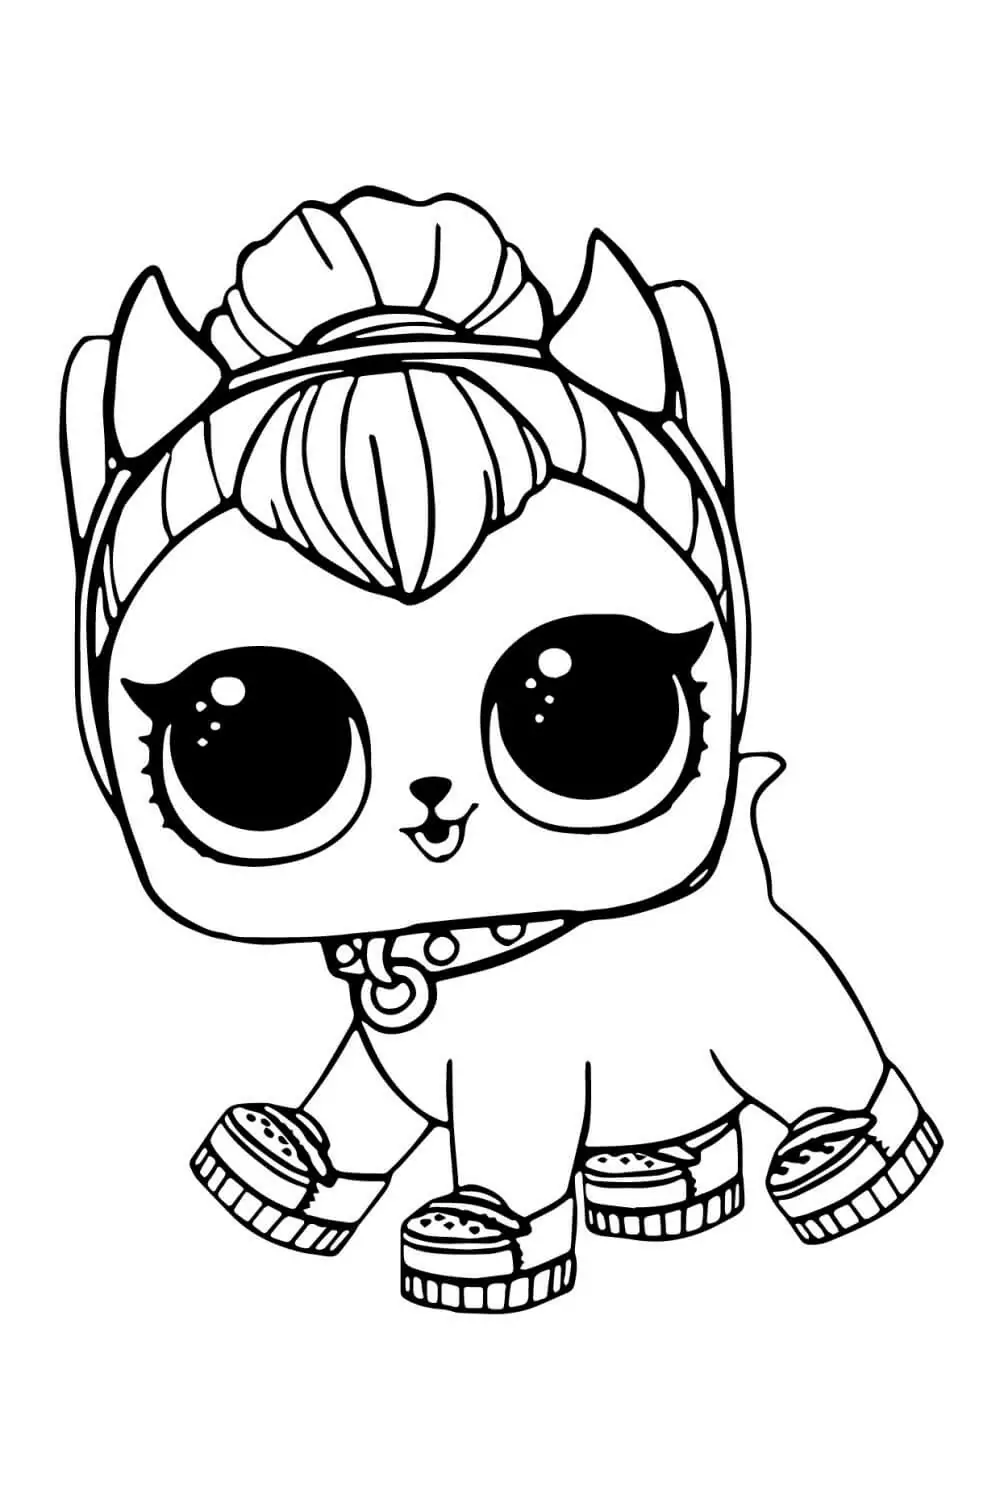 Toys & Dolls Coloring Pages - Free Coloring Pages at ColoringOnly.com